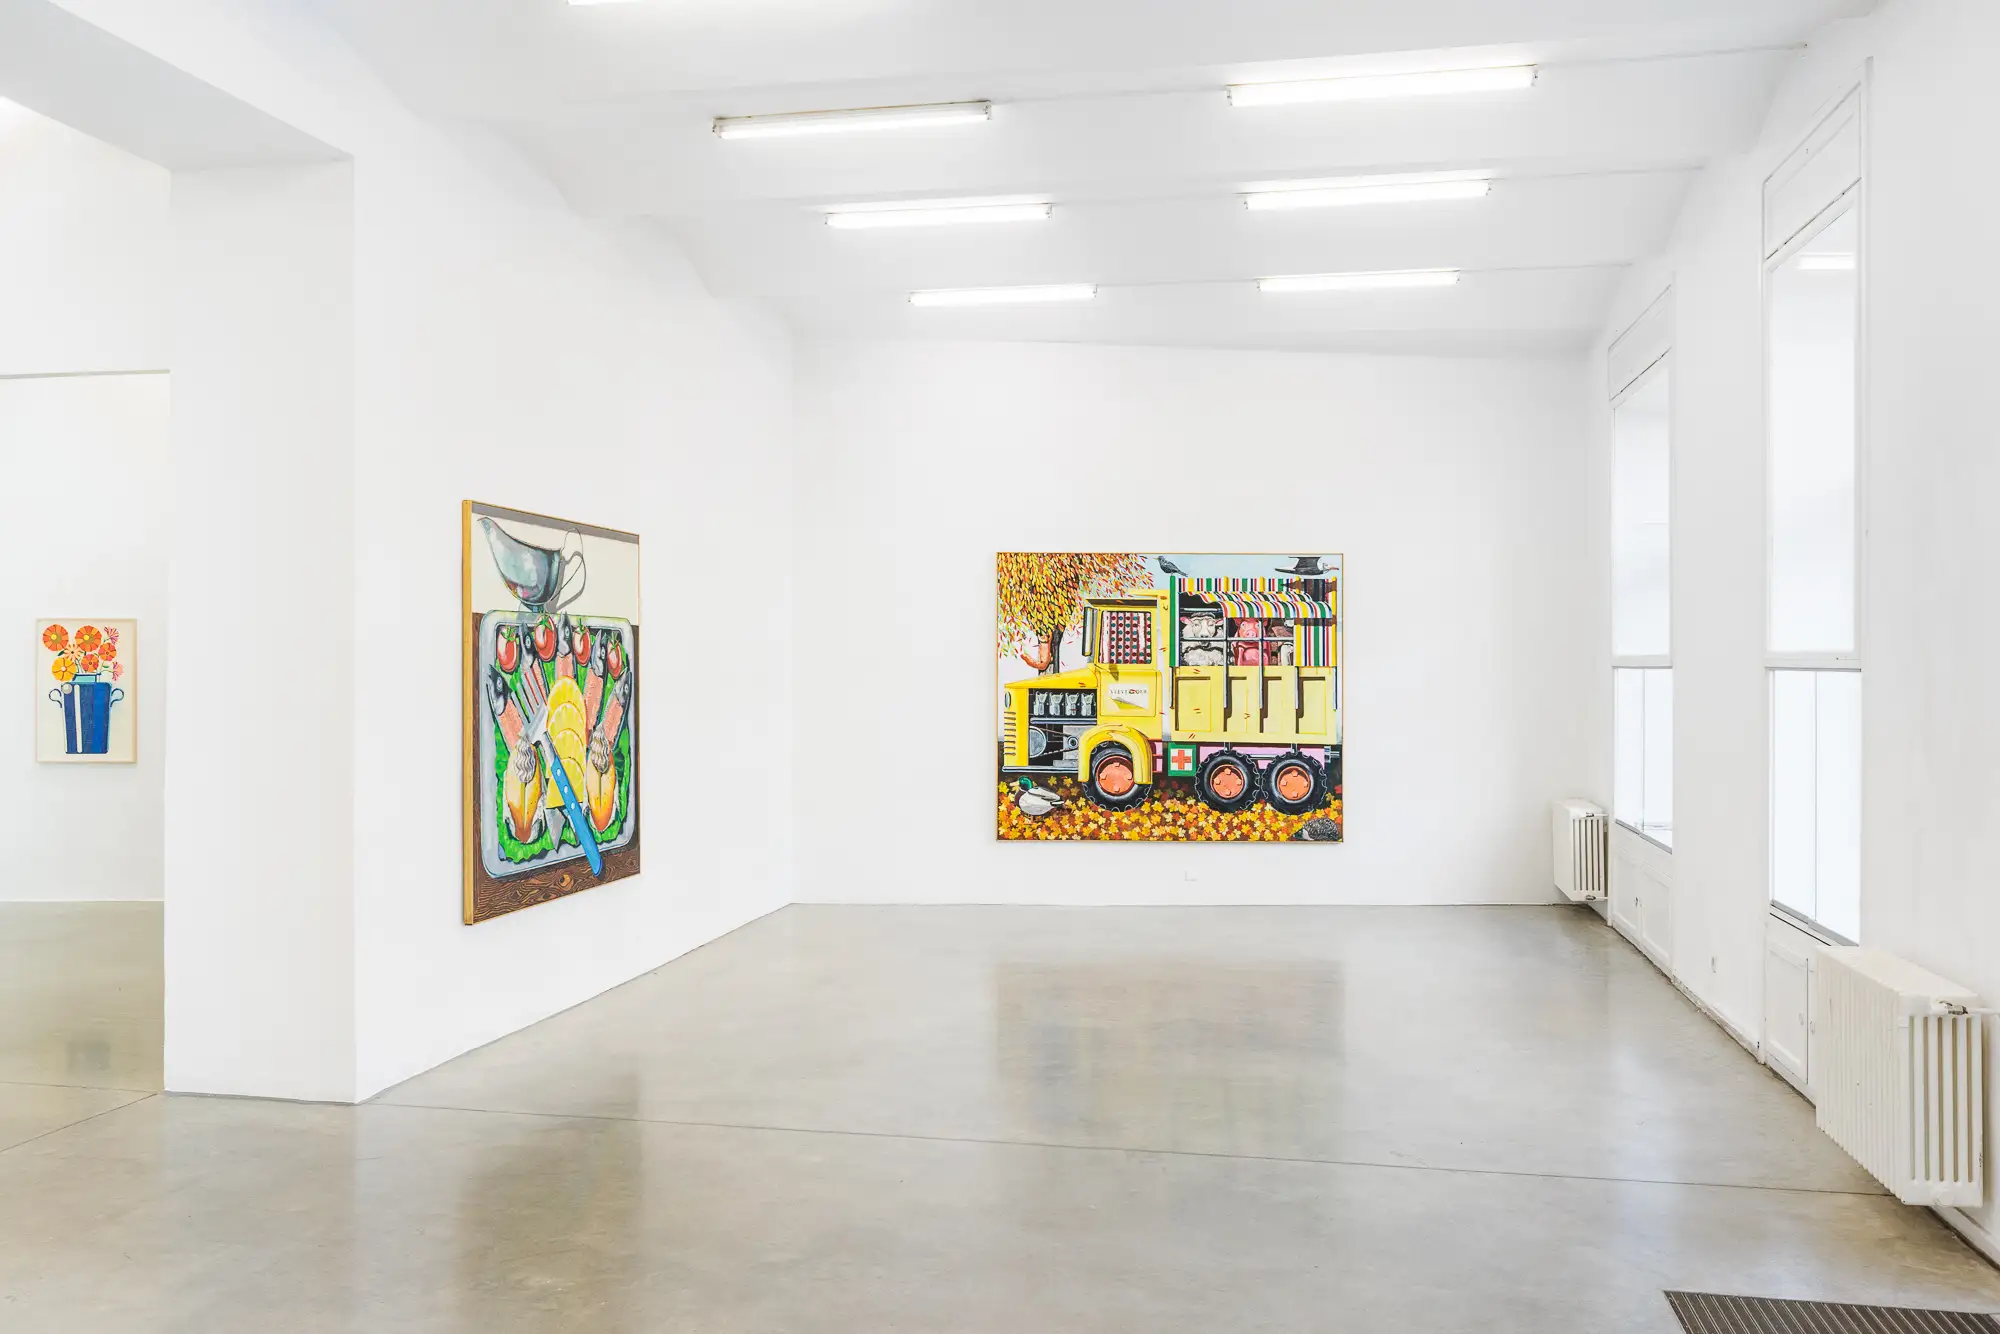 kristof santy, new face in contemporary artinterior view of the artist latest exhibition at christine könig gallery, showcasing vibrant and eclectic paintings including a large yellow truck and a colorful still life